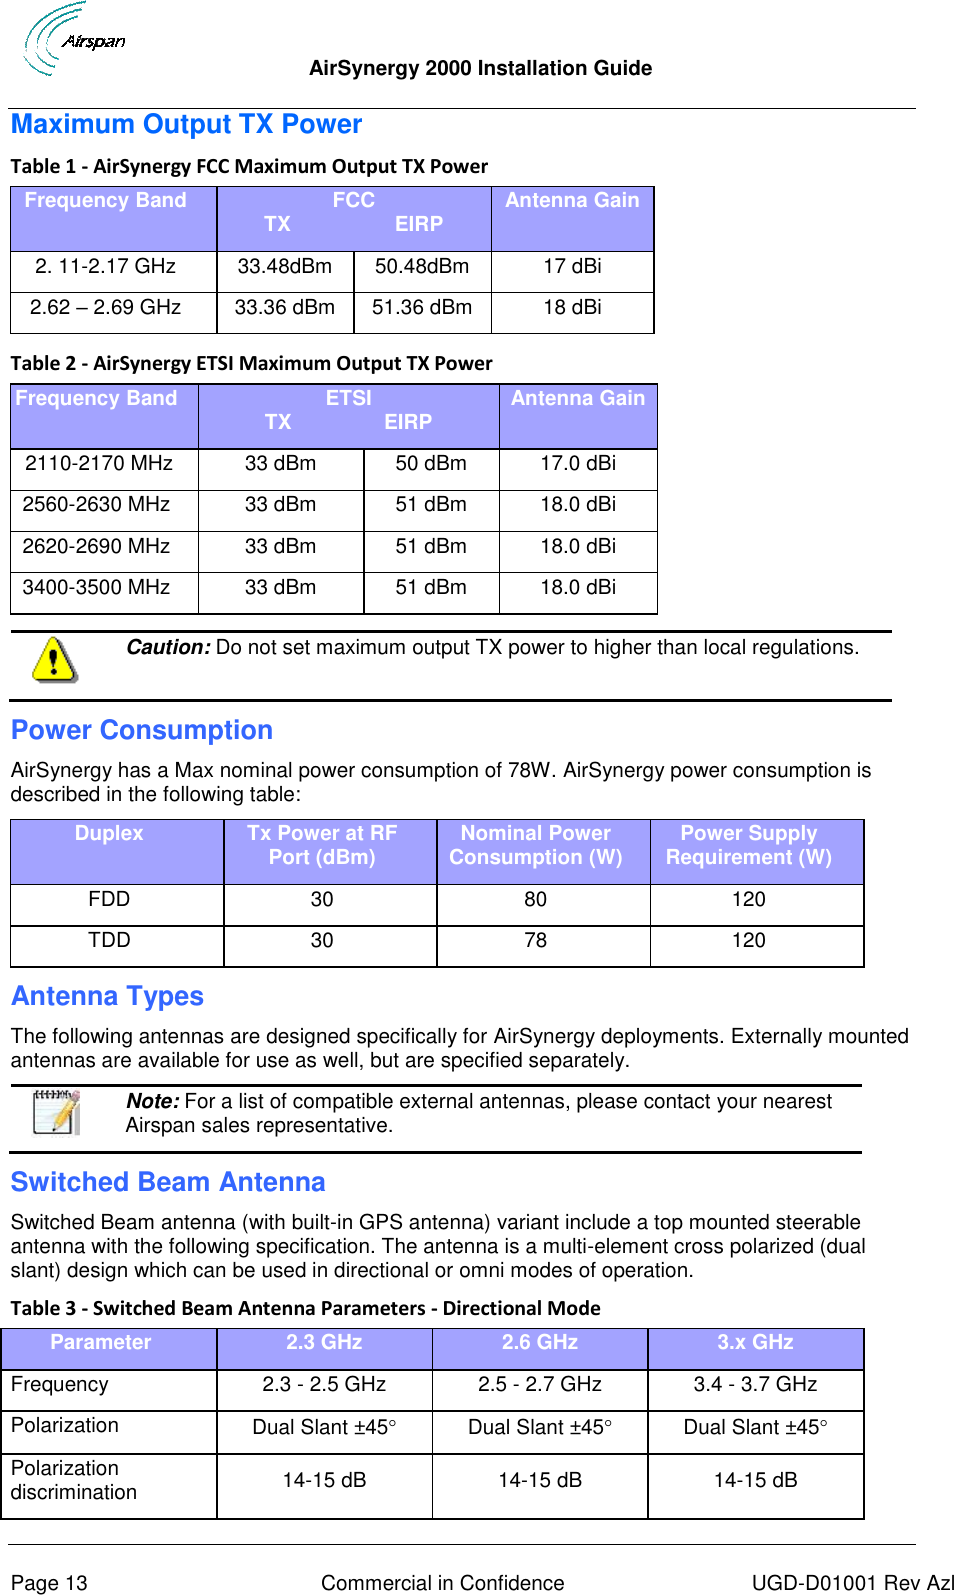  AirSynergy 2000 Installation Guide     Page 13  Commercial in Confidence  UGD-D01001 Rev Azl Maximum Output TX Power Table 1 - AirSynergy FCC Maximum Output TX Power Frequency Band FCC TX                  EIRP Antenna Gain 2. 11-2.17 GHz 33.48dBm 50.48dBm 17 dBi 2.62 – 2.69 GHz 33.36 dBm 51.36 dBm 18 dBi  Table 2 - AirSynergy ETSI Maximum Output TX Power Frequency Band ETSI TX                EIRP Antenna Gain  2110-2170 MHz 33 dBm 50 dBm 17.0 dBi 2560-2630 MHz 33 dBm 51 dBm 18.0 dBi 2620-2690 MHz 33 dBm 51 dBm 18.0 dBi 3400-3500 MHz 33 dBm 51 dBm 18.0 dBi   Caution: Do not set maximum output TX power to higher than local regulations. Power Consumption AirSynergy has a Max nominal power consumption of 78W. AirSynergy power consumption is described in the following table: Duplex Tx Power at RF Port (dBm) Nominal Power Consumption (W) Power Supply Requirement (W) FDD 30 80 120 TDD 30 78 120 Antenna Types The following antennas are designed specifically for AirSynergy deployments. Externally mounted antennas are available for use as well, but are specified separately.  Note: For a list of compatible external antennas, please contact your nearest Airspan sales representative. Switched Beam Antenna Switched Beam antenna (with built-in GPS antenna) variant include a top mounted steerable antenna with the following specification. The antenna is a multi-element cross polarized (dual slant) design which can be used in directional or omni modes of operation. Table 3 - Switched Beam Antenna Parameters - Directional Mode Parameter 2.3 GHz 2.6 GHz 3.x GHz Frequency 2.3 - 2.5 GHz 2.5 - 2.7 GHz 3.4 - 3.7 GHz Polarization Dual Slant ±45 Dual Slant ±45 Dual Slant ±45 Polarization discrimination 14-15 dB 14-15 dB 14-15 dB 